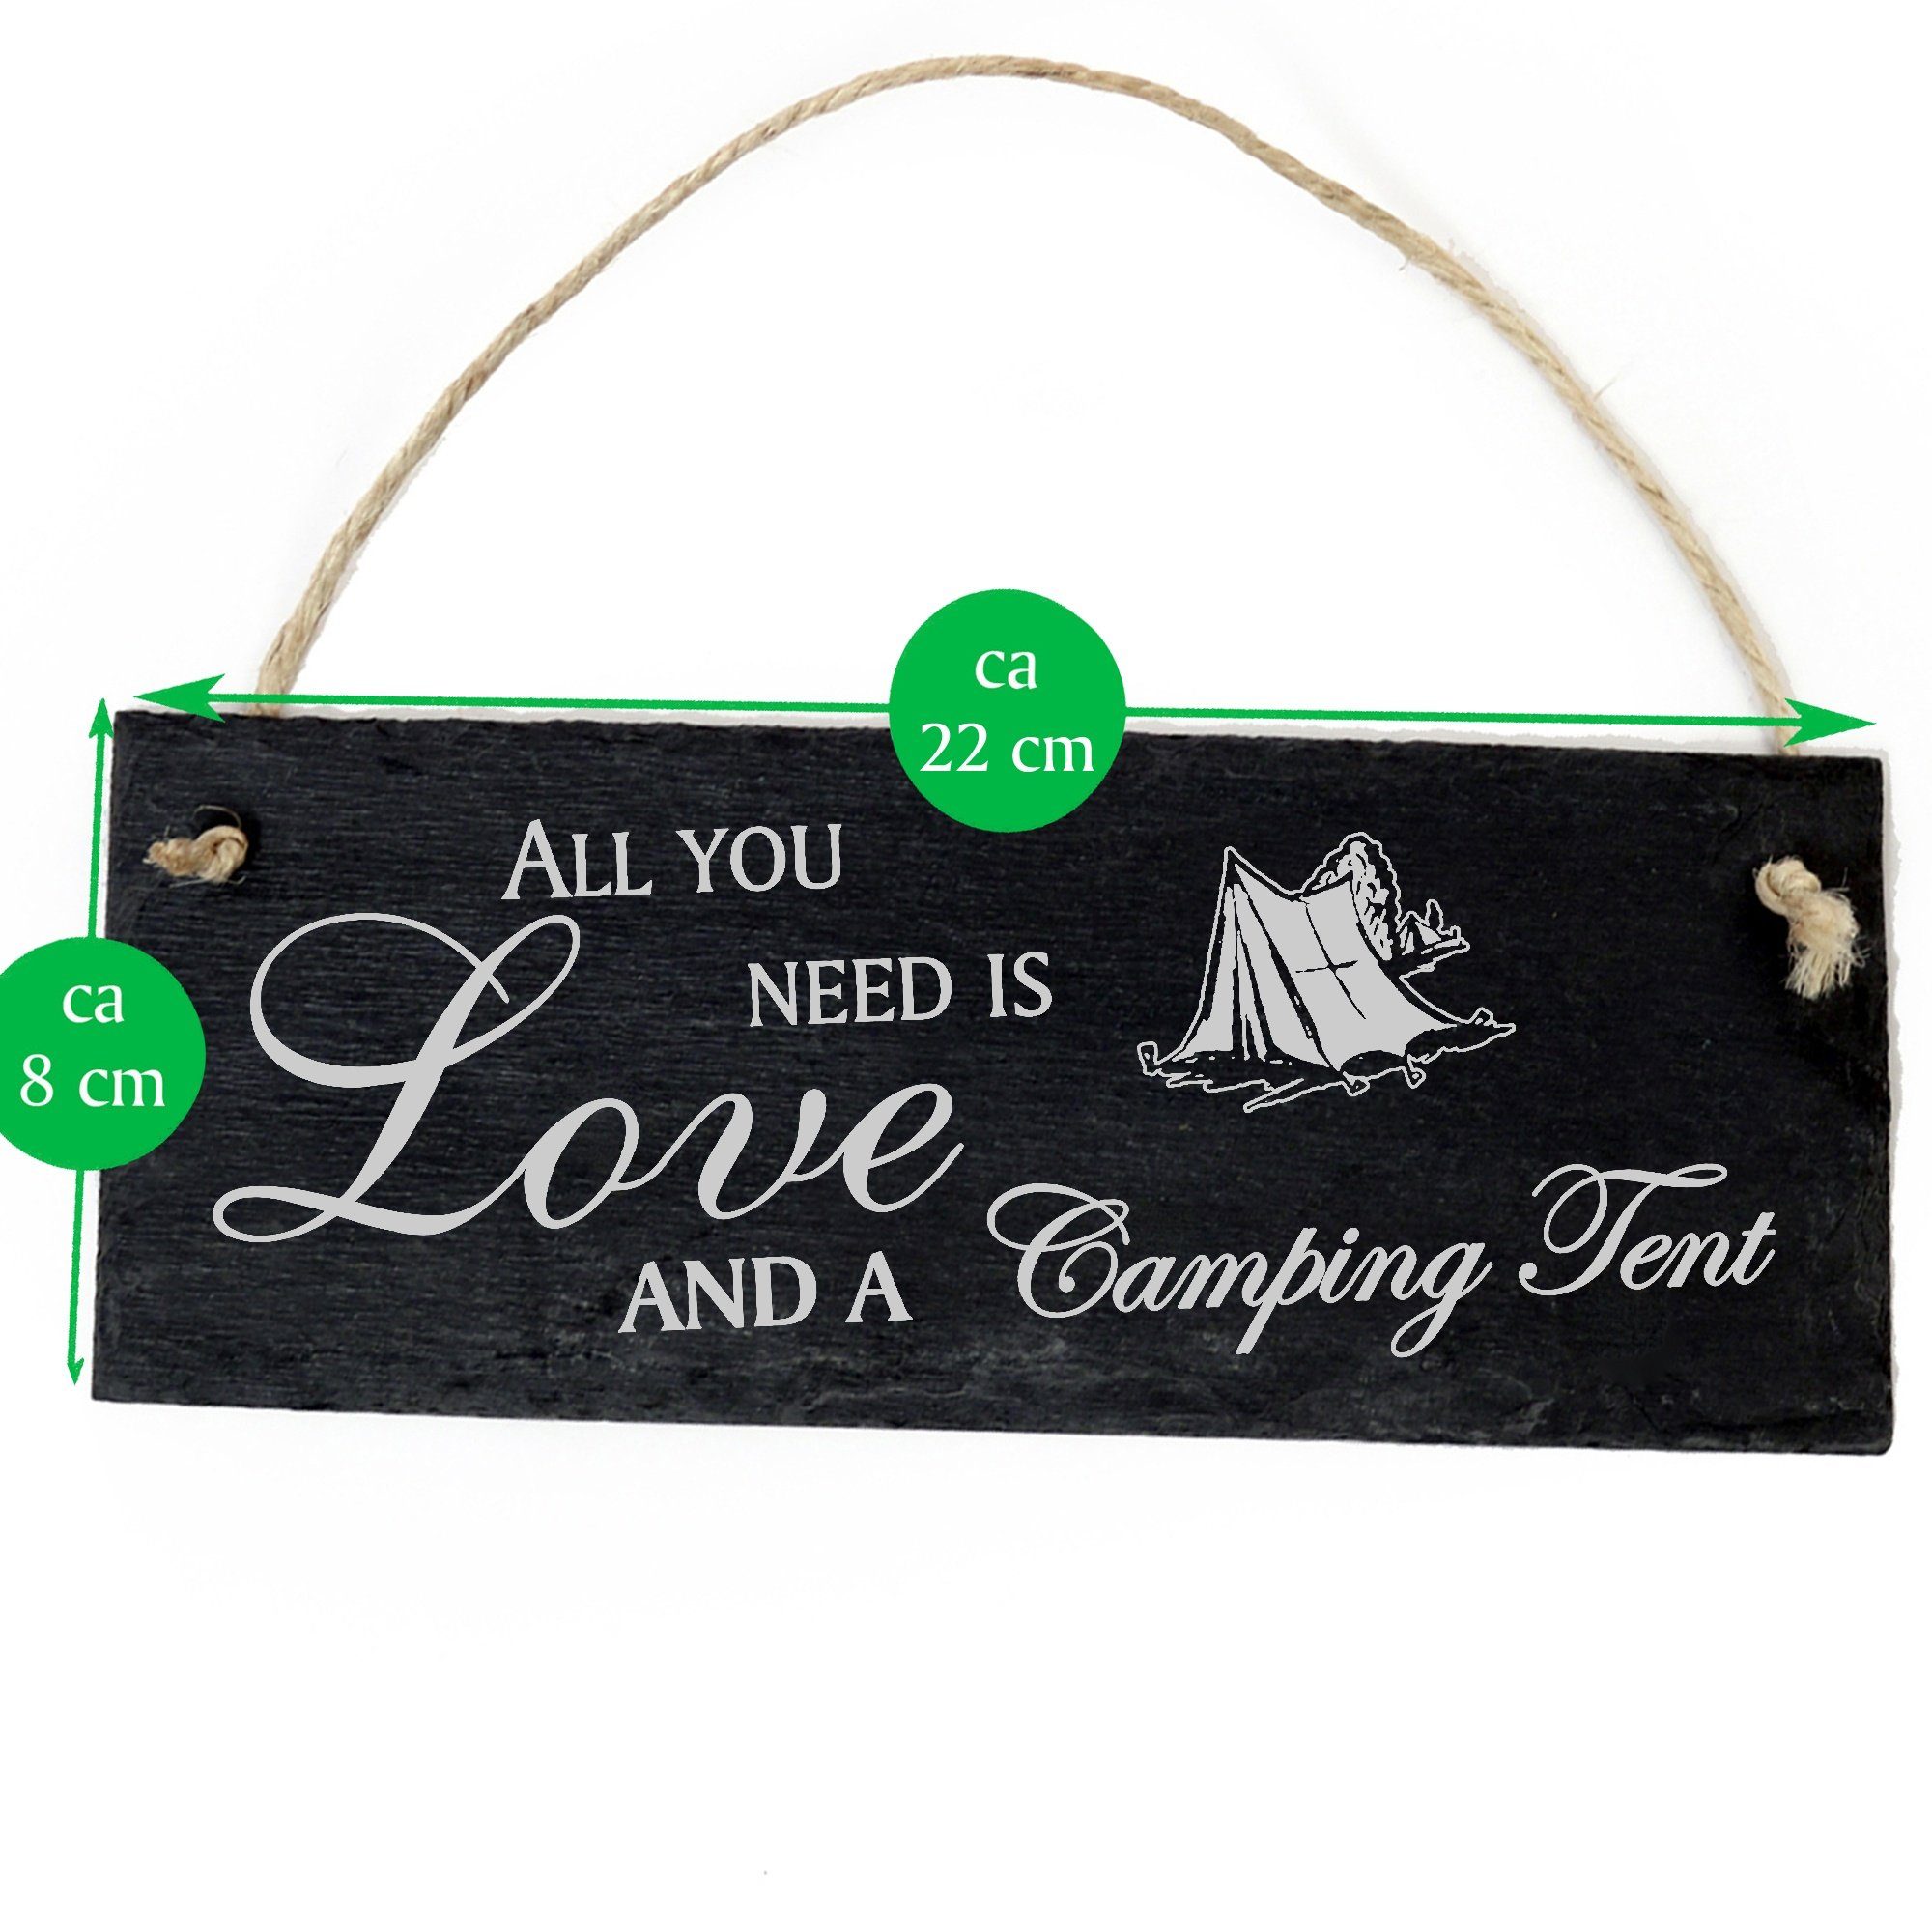 Dekolando Hängedekoration Campingzelt 22x8cm need All is Tent Love a and you Camping